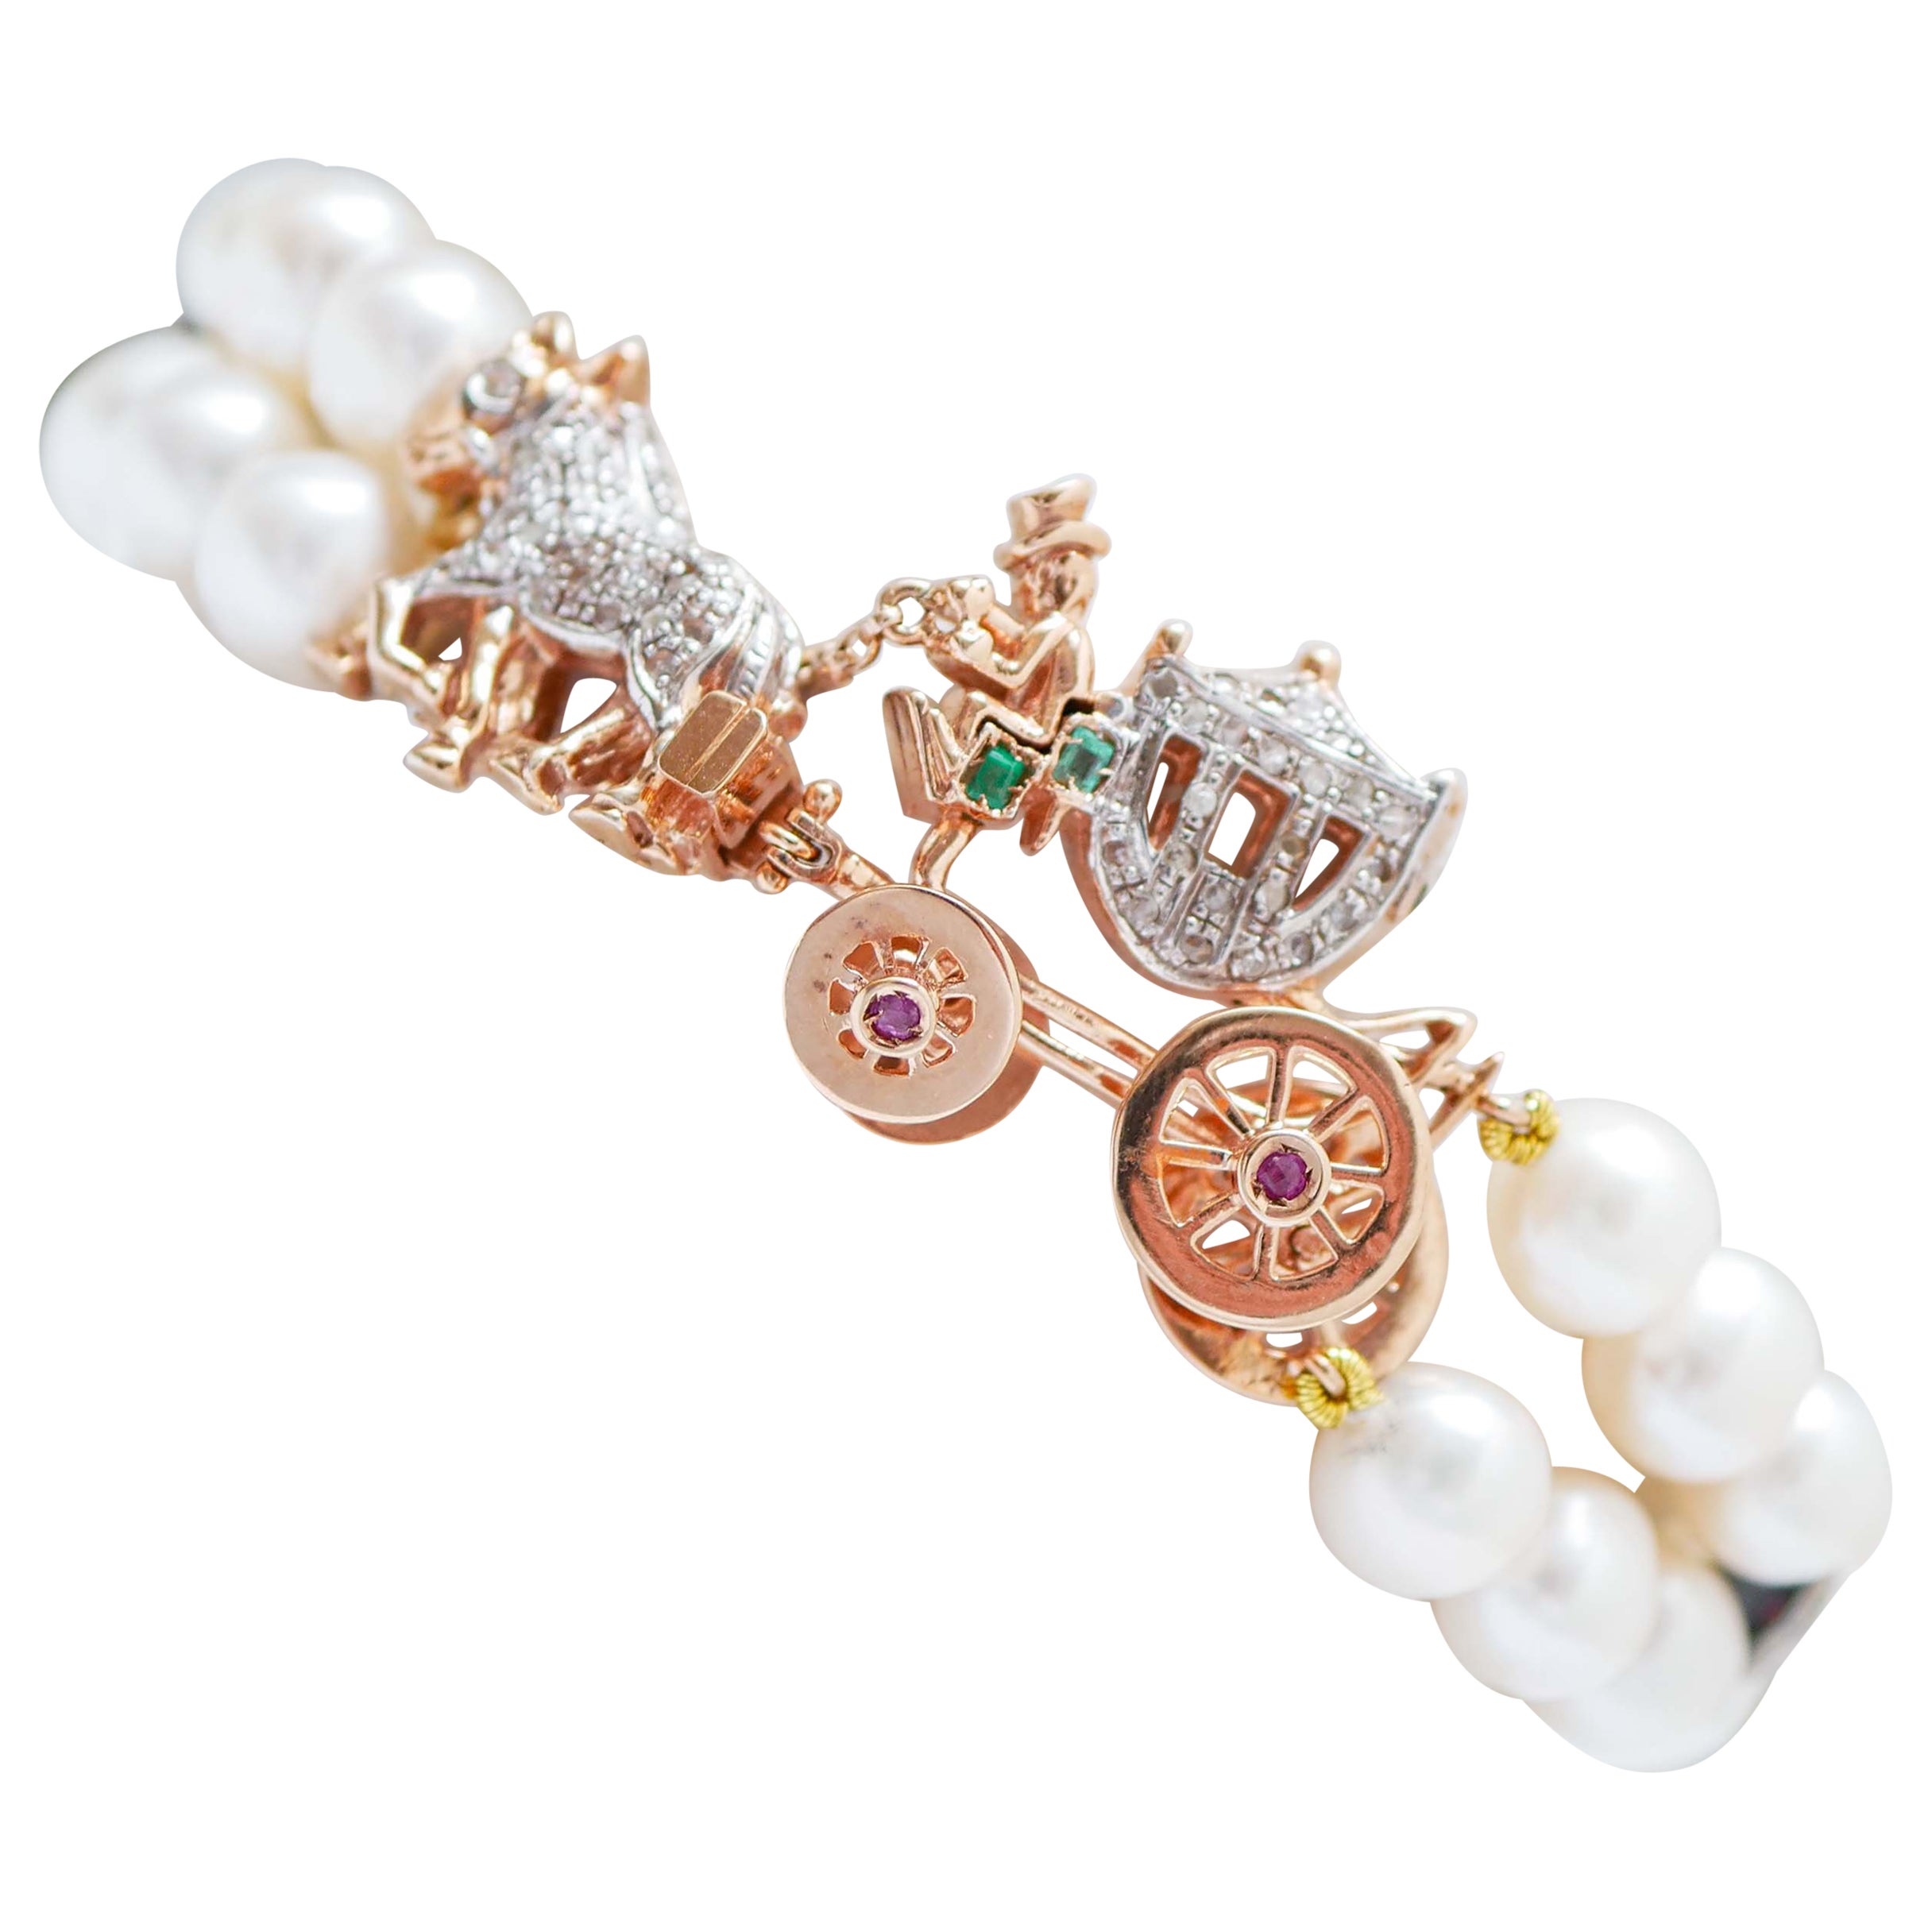 Pearls, Rubies, Emeralds, Diamonds, Rose Gold and Silver Carriage Bracelet For Sale